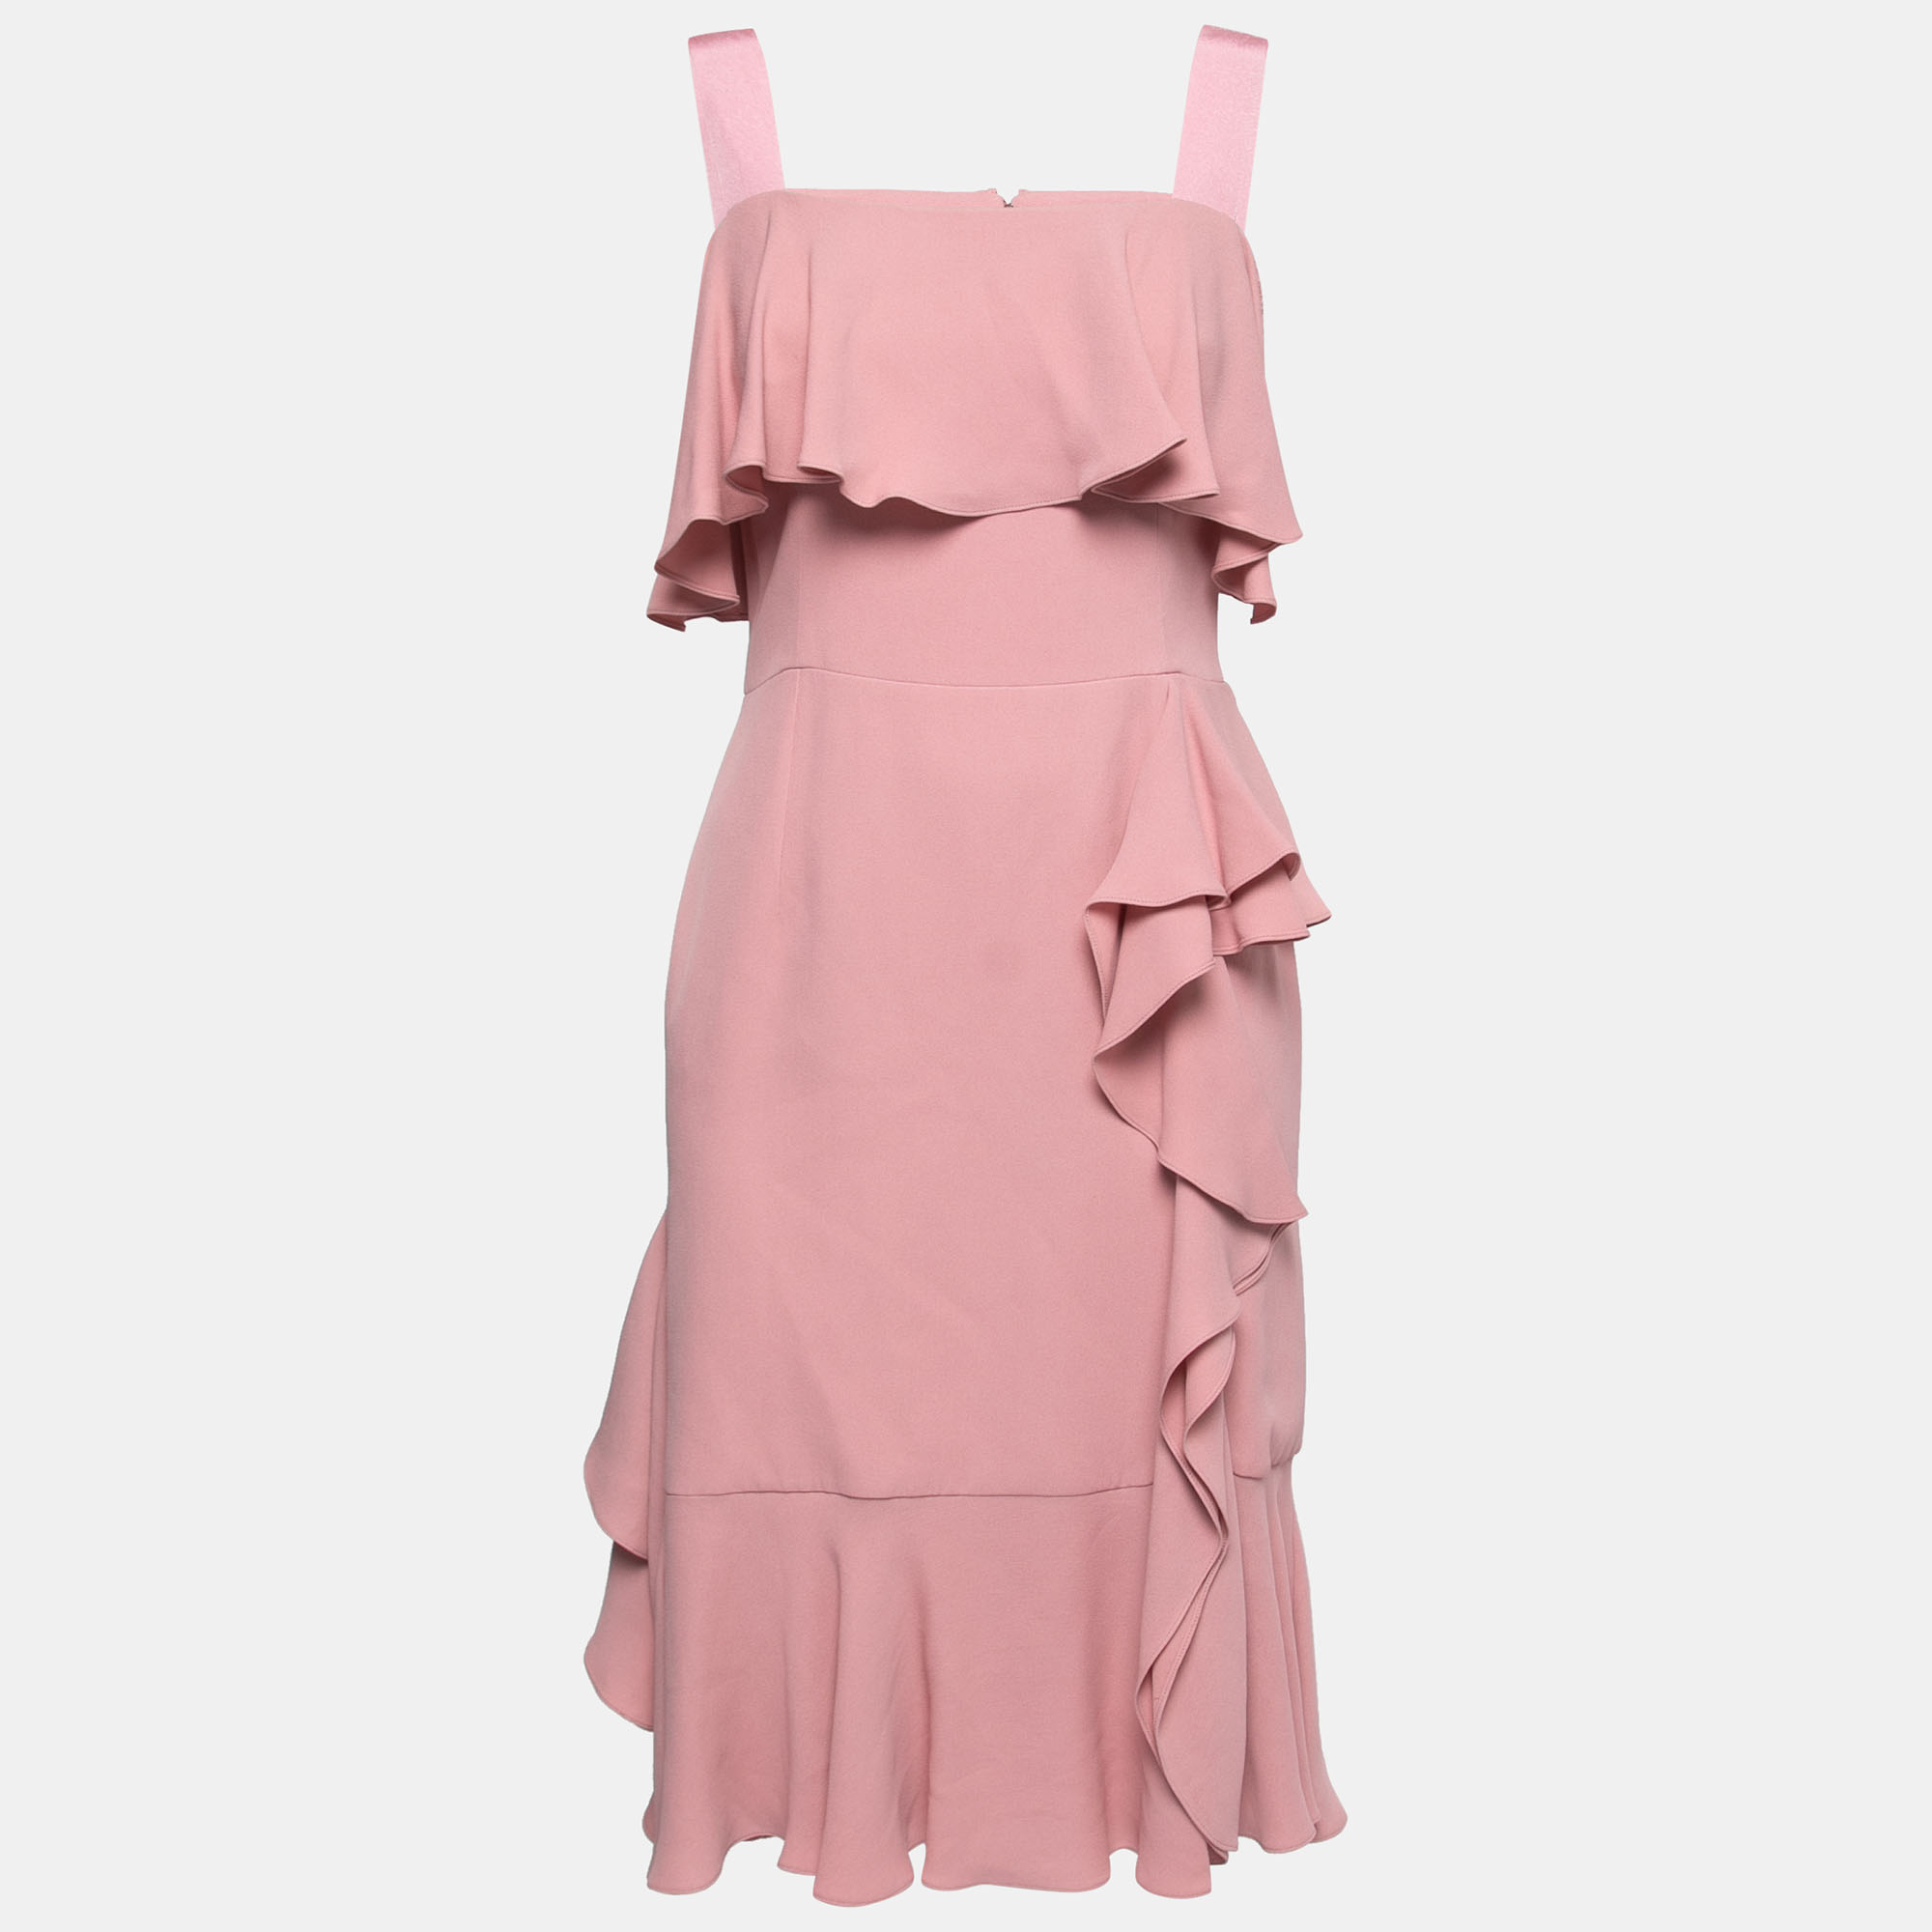 The fine artistry and the feminine silhouette of this Alexander Mc Queen dress exhibit the labels impeccable craftsmanship in tailoring. It is stitched using quality materials has a good fit and can be easily styled with chic accessories open toe sandals and sling bags.